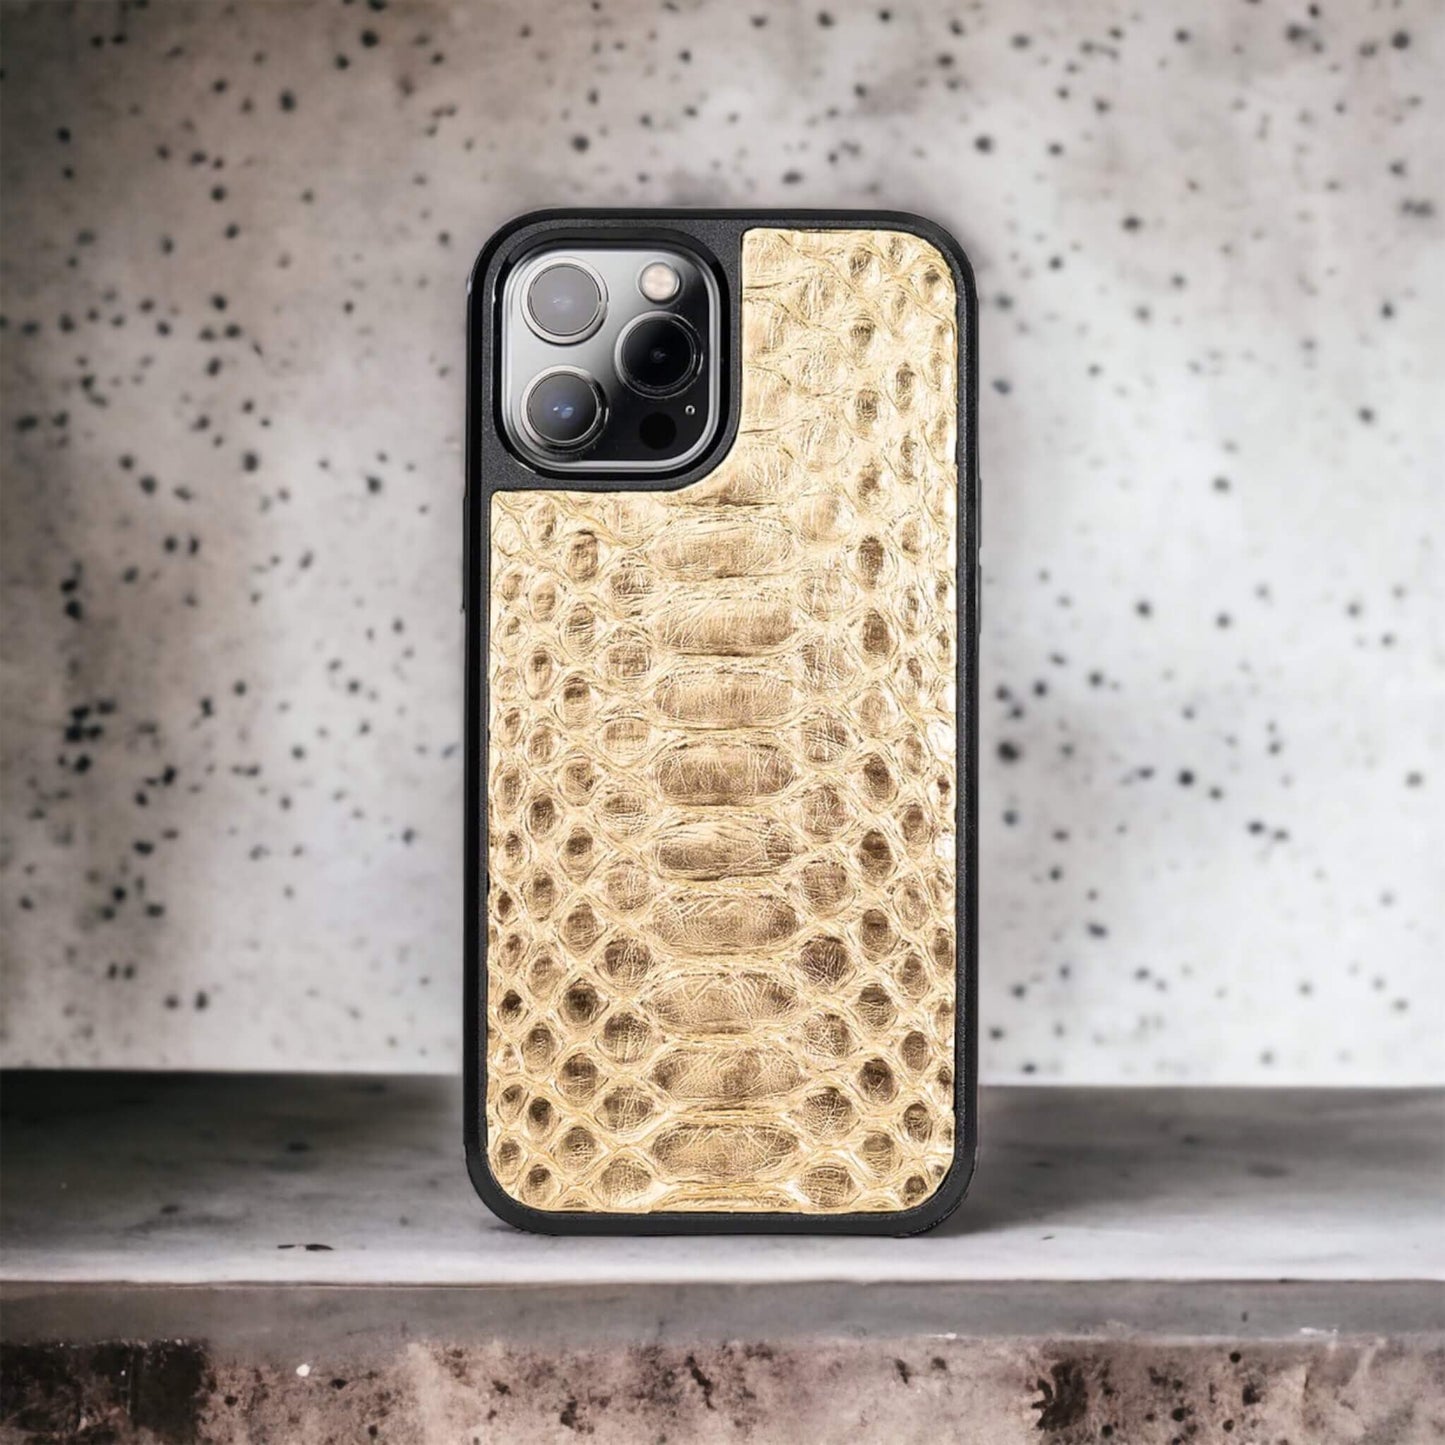 IPHONE 12 PRO MAX CASES PYTHON BRIGHT GOLD